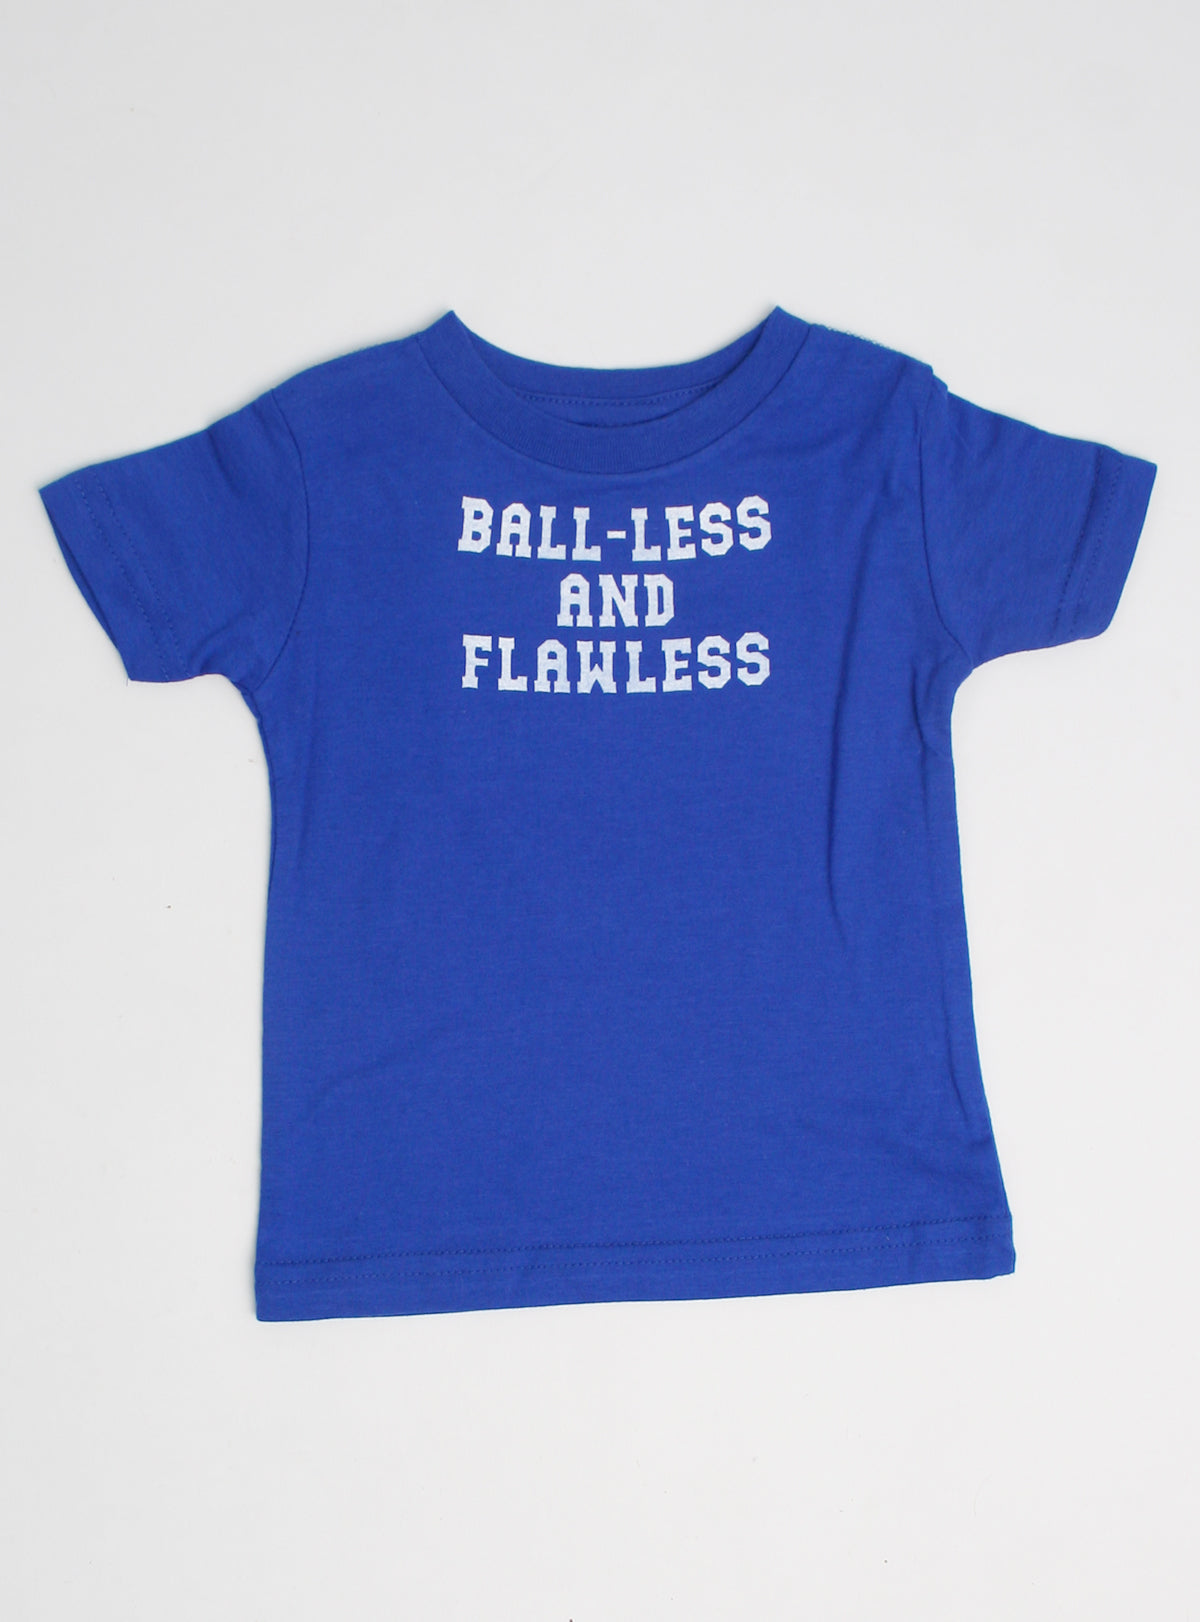 Ball-less And Flawless Dog Tee